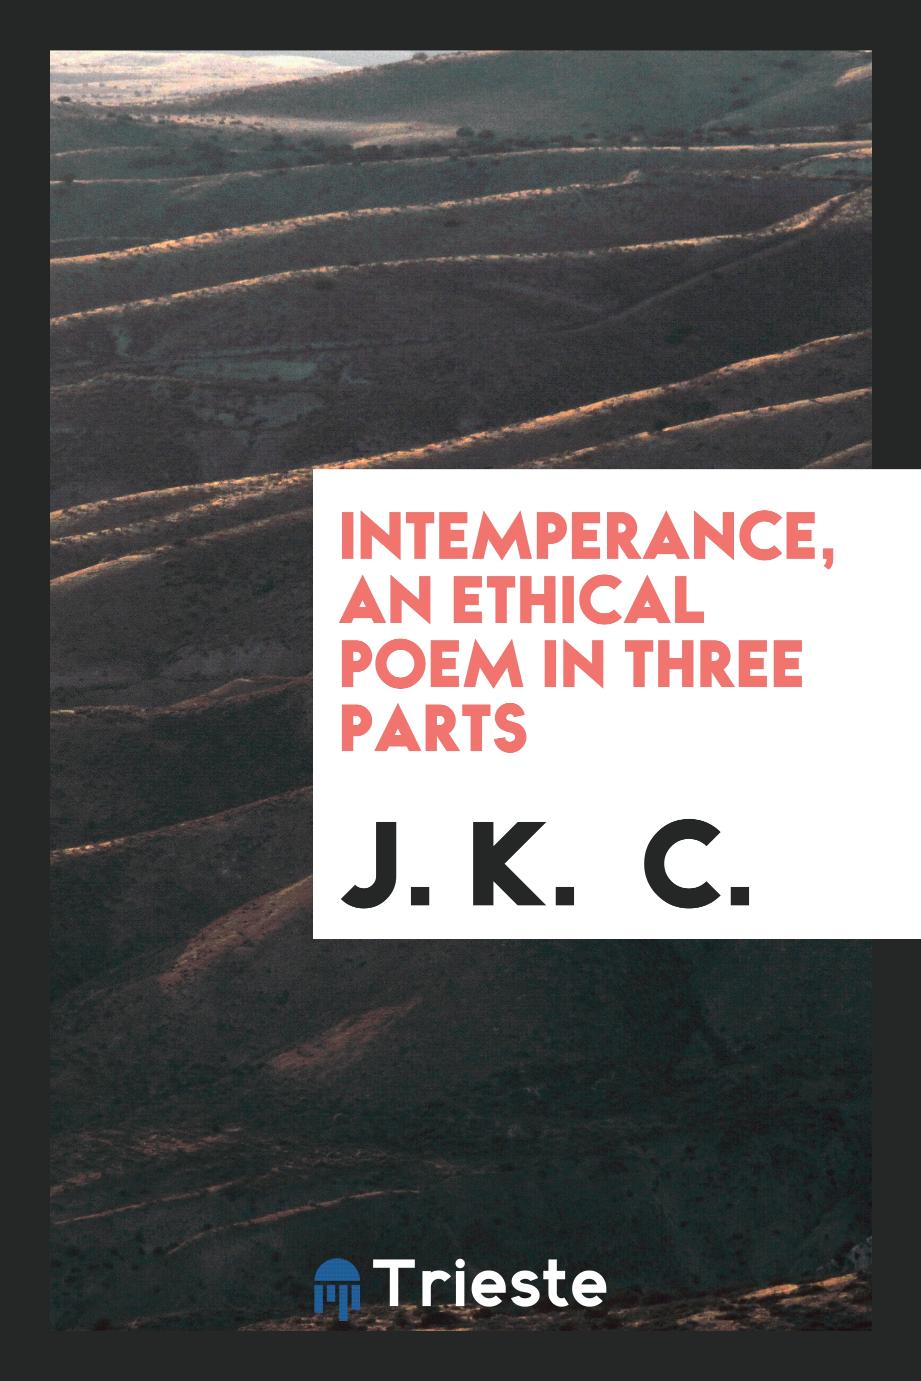 Intemperance, an ethical poem in three parts